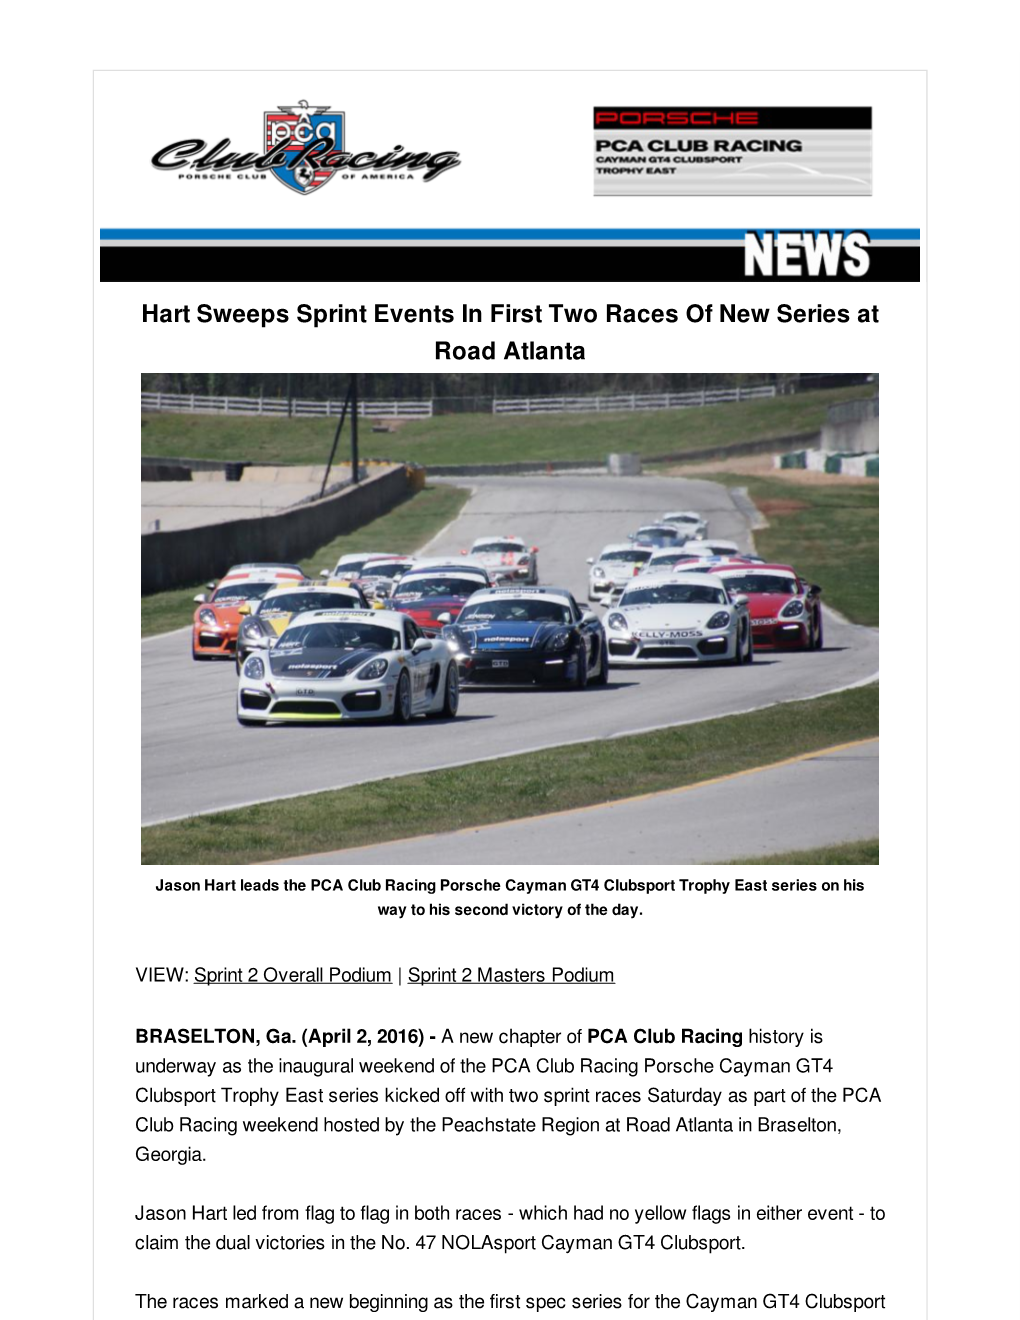 Hart Sweeps Sprint Events in First Two Races of New Series at Road Atlanta